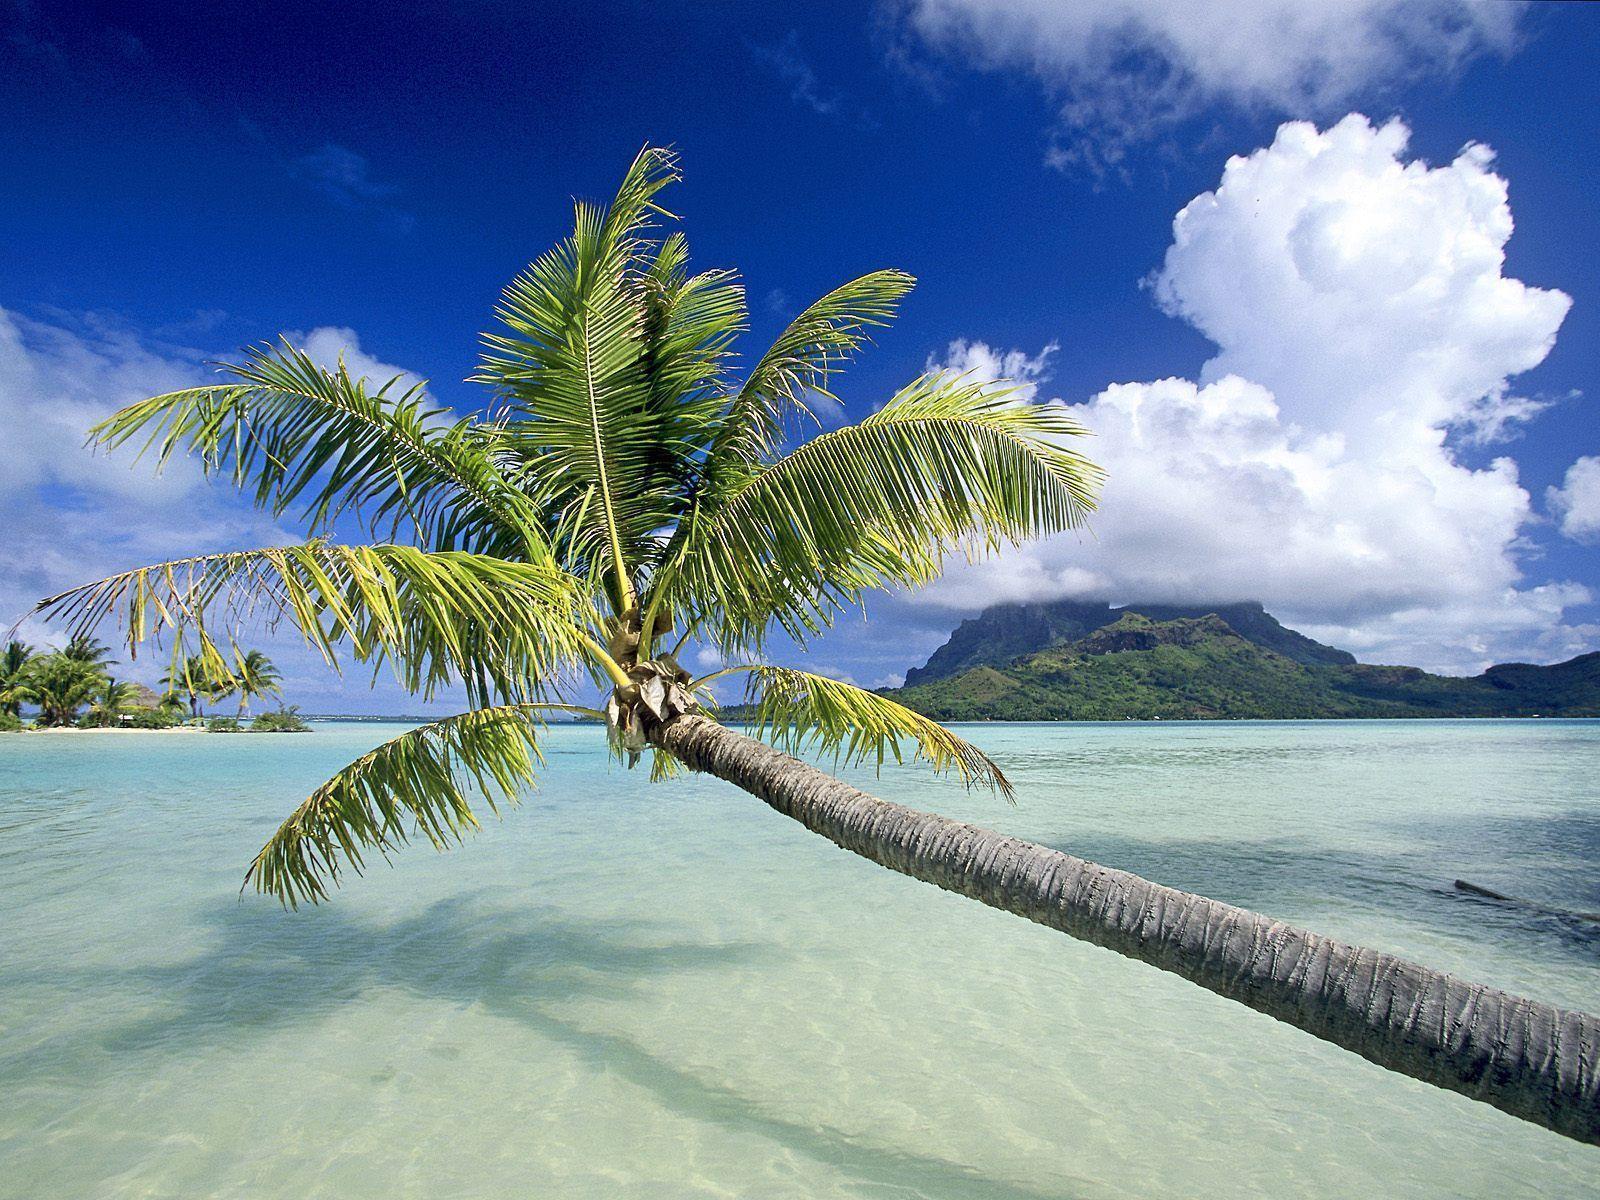 The Palm Tree on beach in panama wallpaper and image